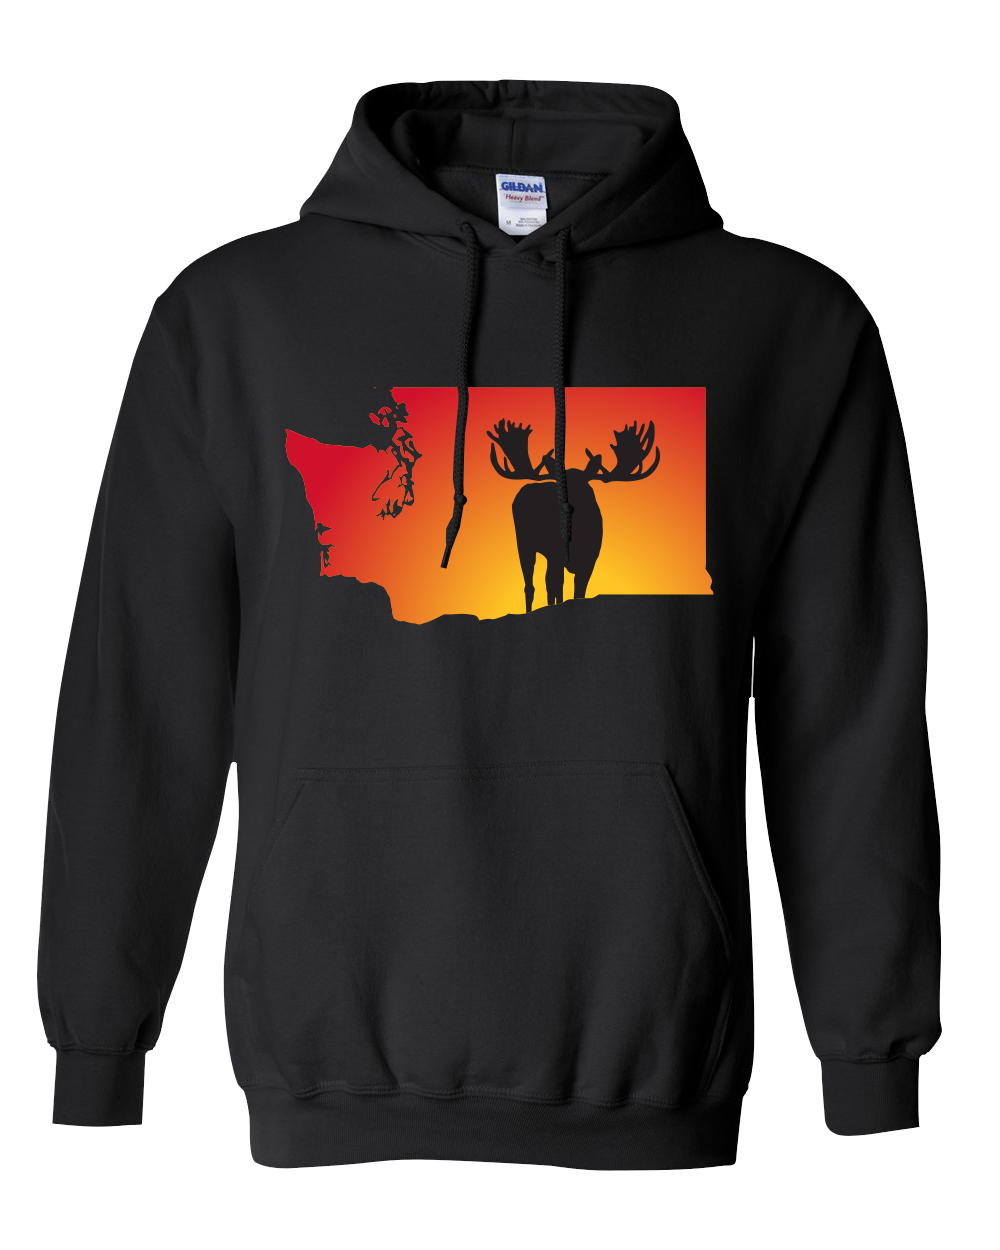 Pullover Hooded Sweatshirt Washington Black Moose Vibrant Design High Quality Tight Knit Ring Spun Low Maintenance Cotton Printed With The Newest Available Color Transfer Technology